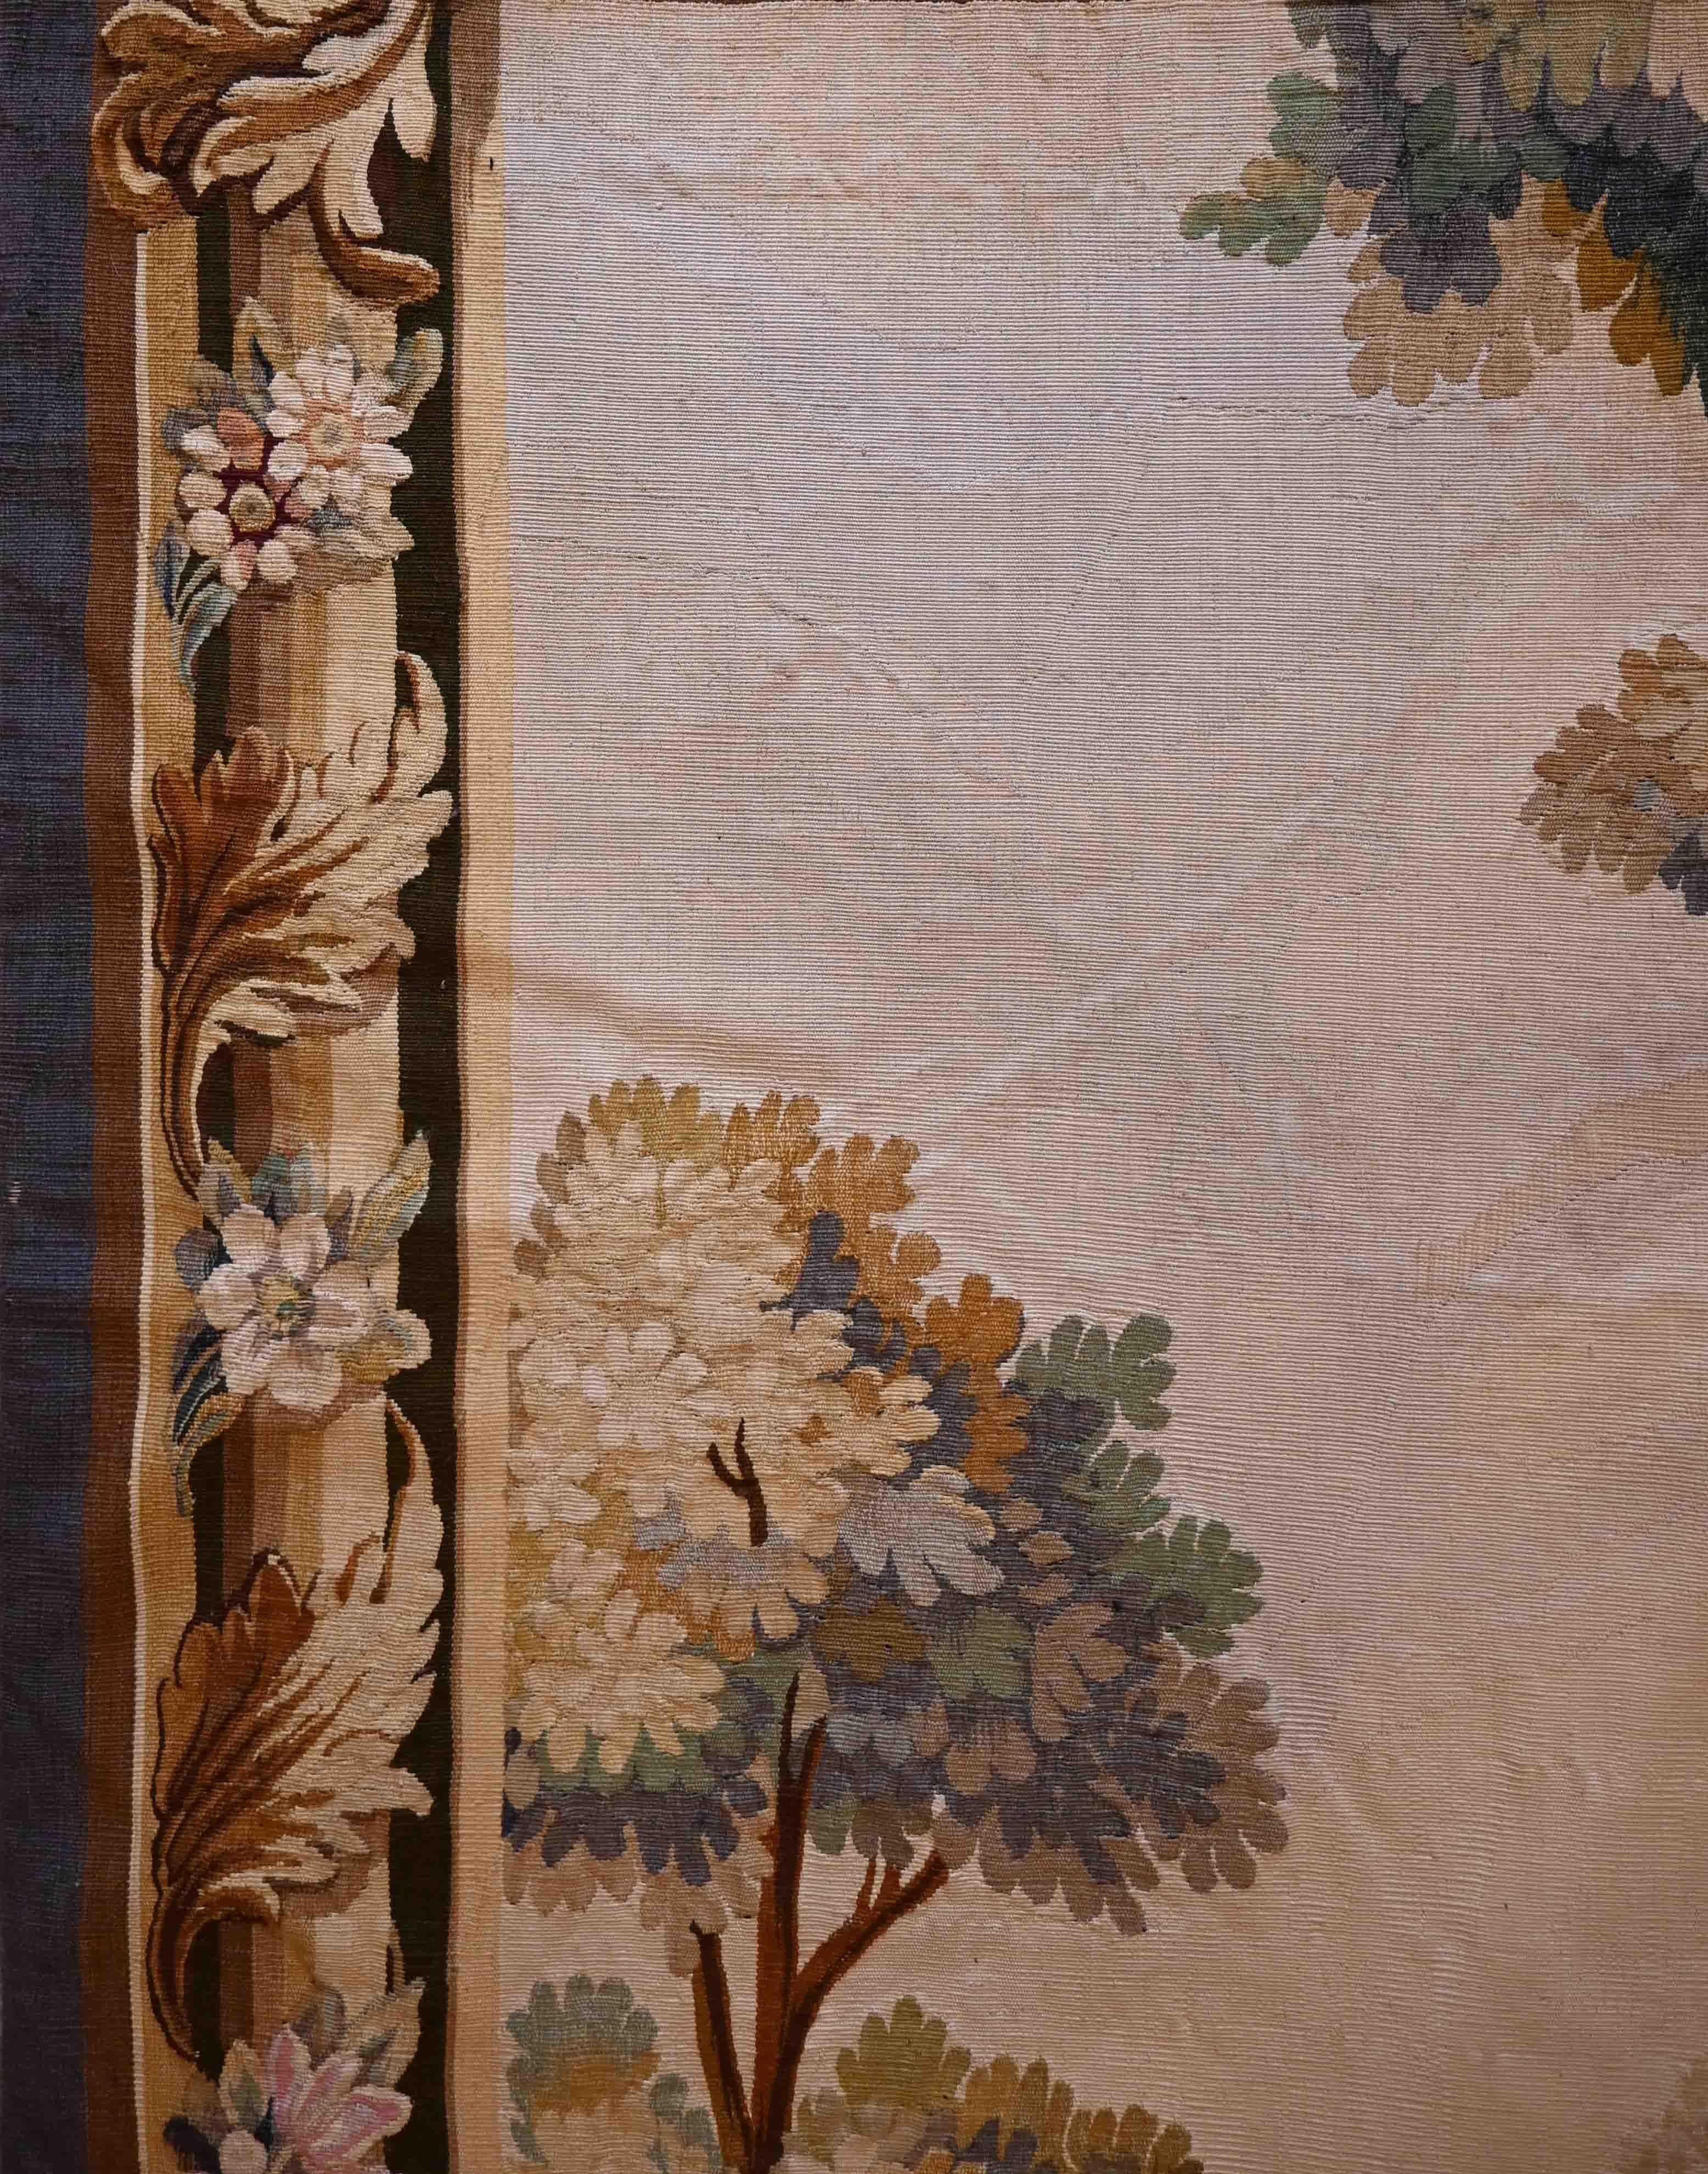 19th century Aubusson tapestry (rest after harvest) - N° 1323

Close to the Eiffel Tower, We are a family business specialized in the purchase, sale and expertise of
tapestries, carpets, kilims and textiles old, modern and contemporary.
We work for